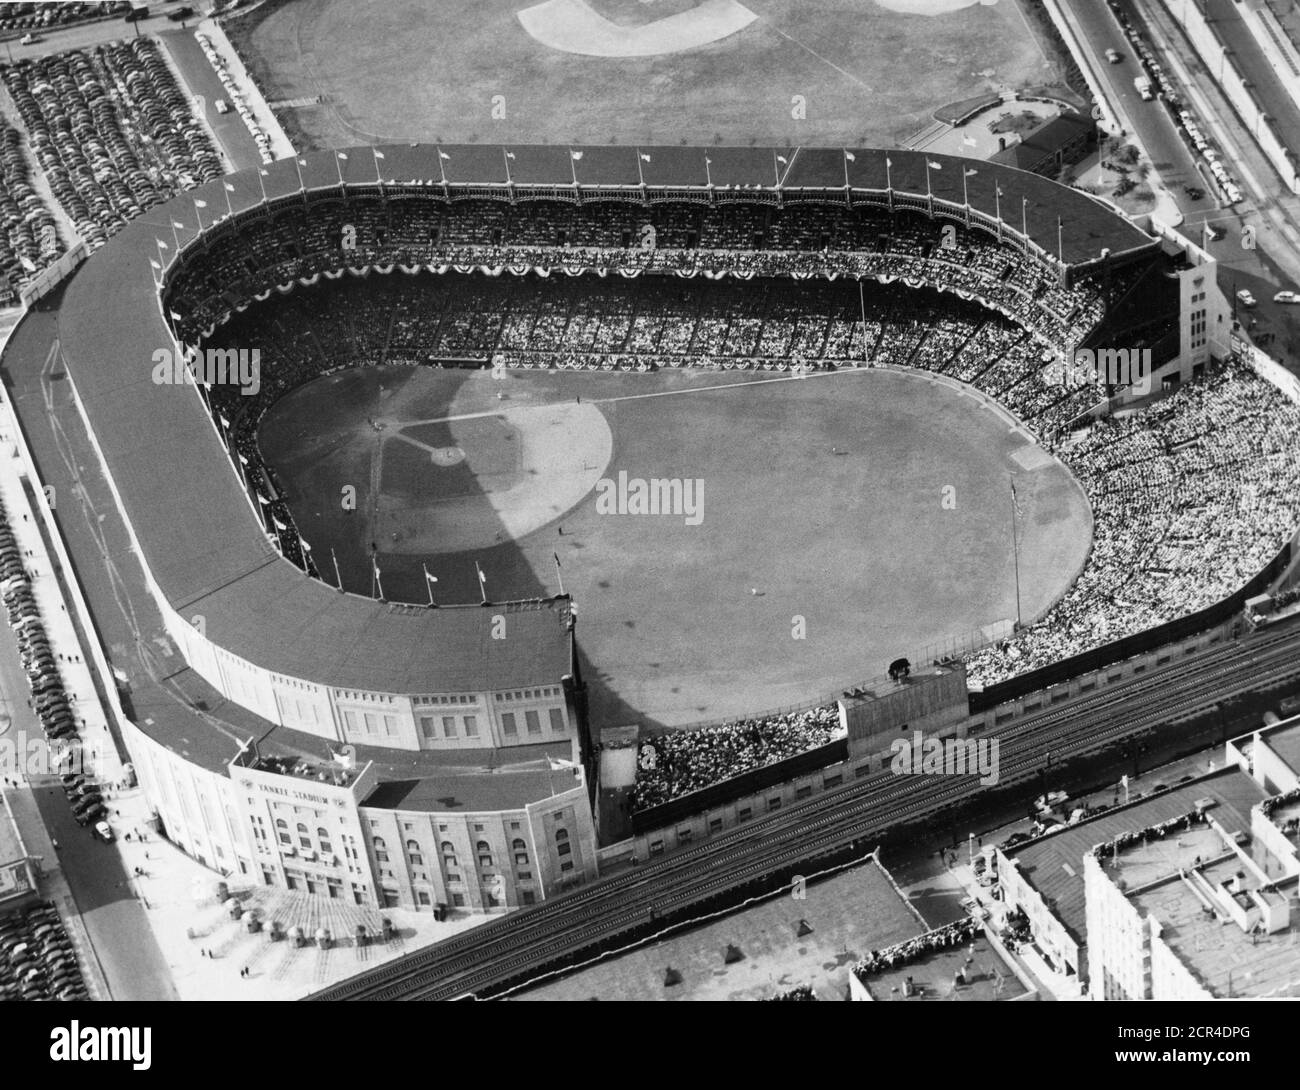 Aerial view of Yankee Stadium with a capacity-filled audience during a baseball game, New York, NY, 1954. (Photo by RBM Vintage Images) Stock Photo